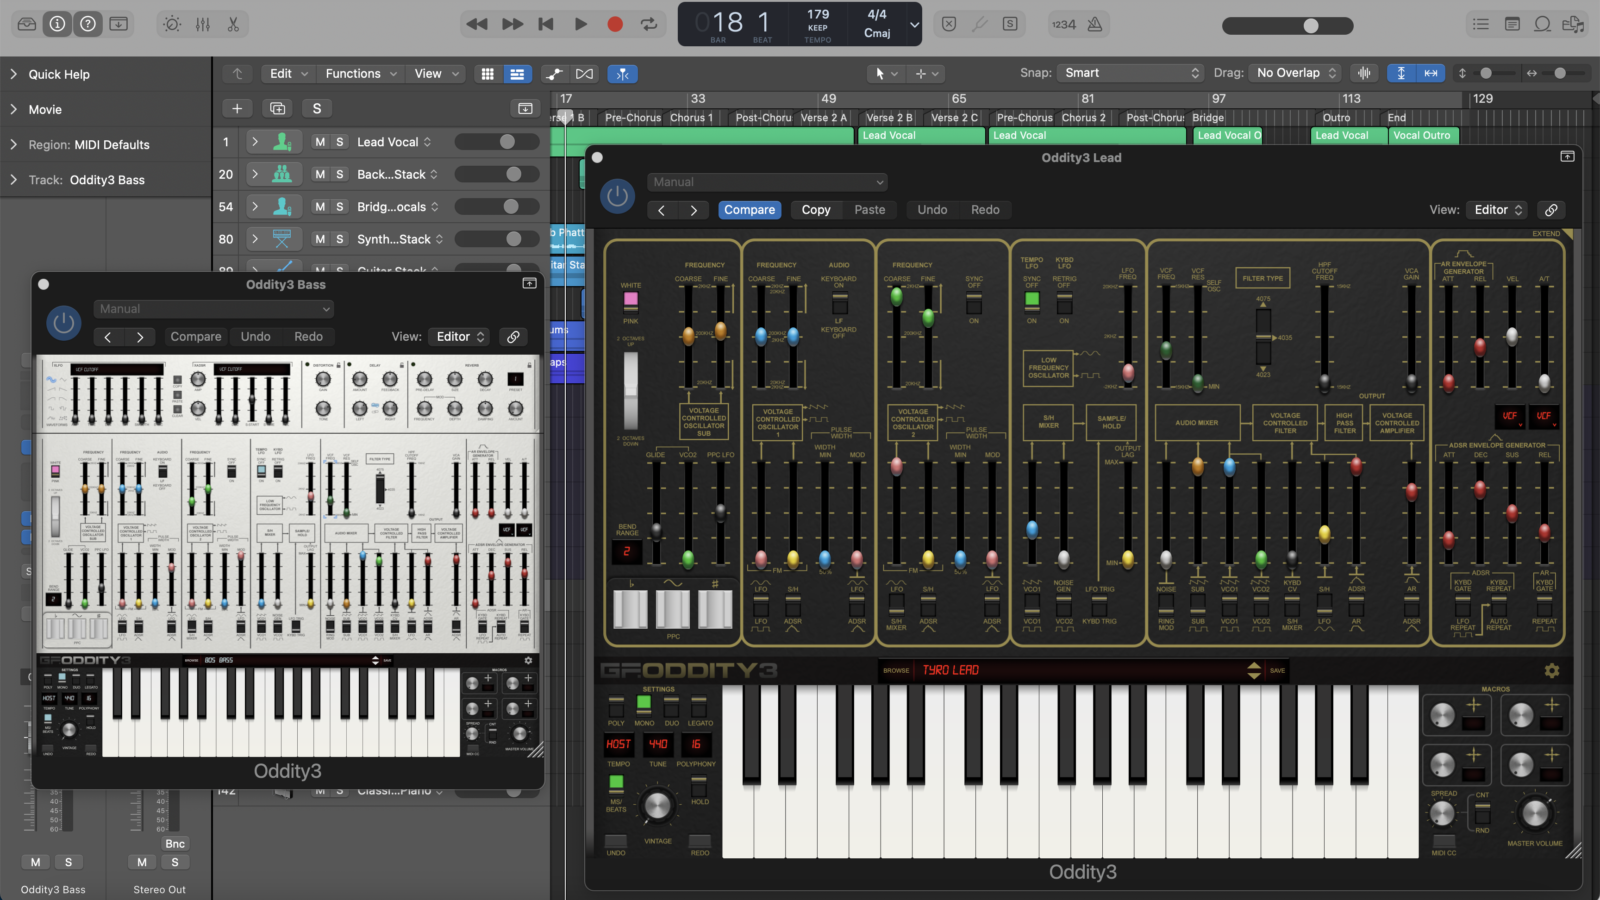 New Versions For Logic Pro and Oddity